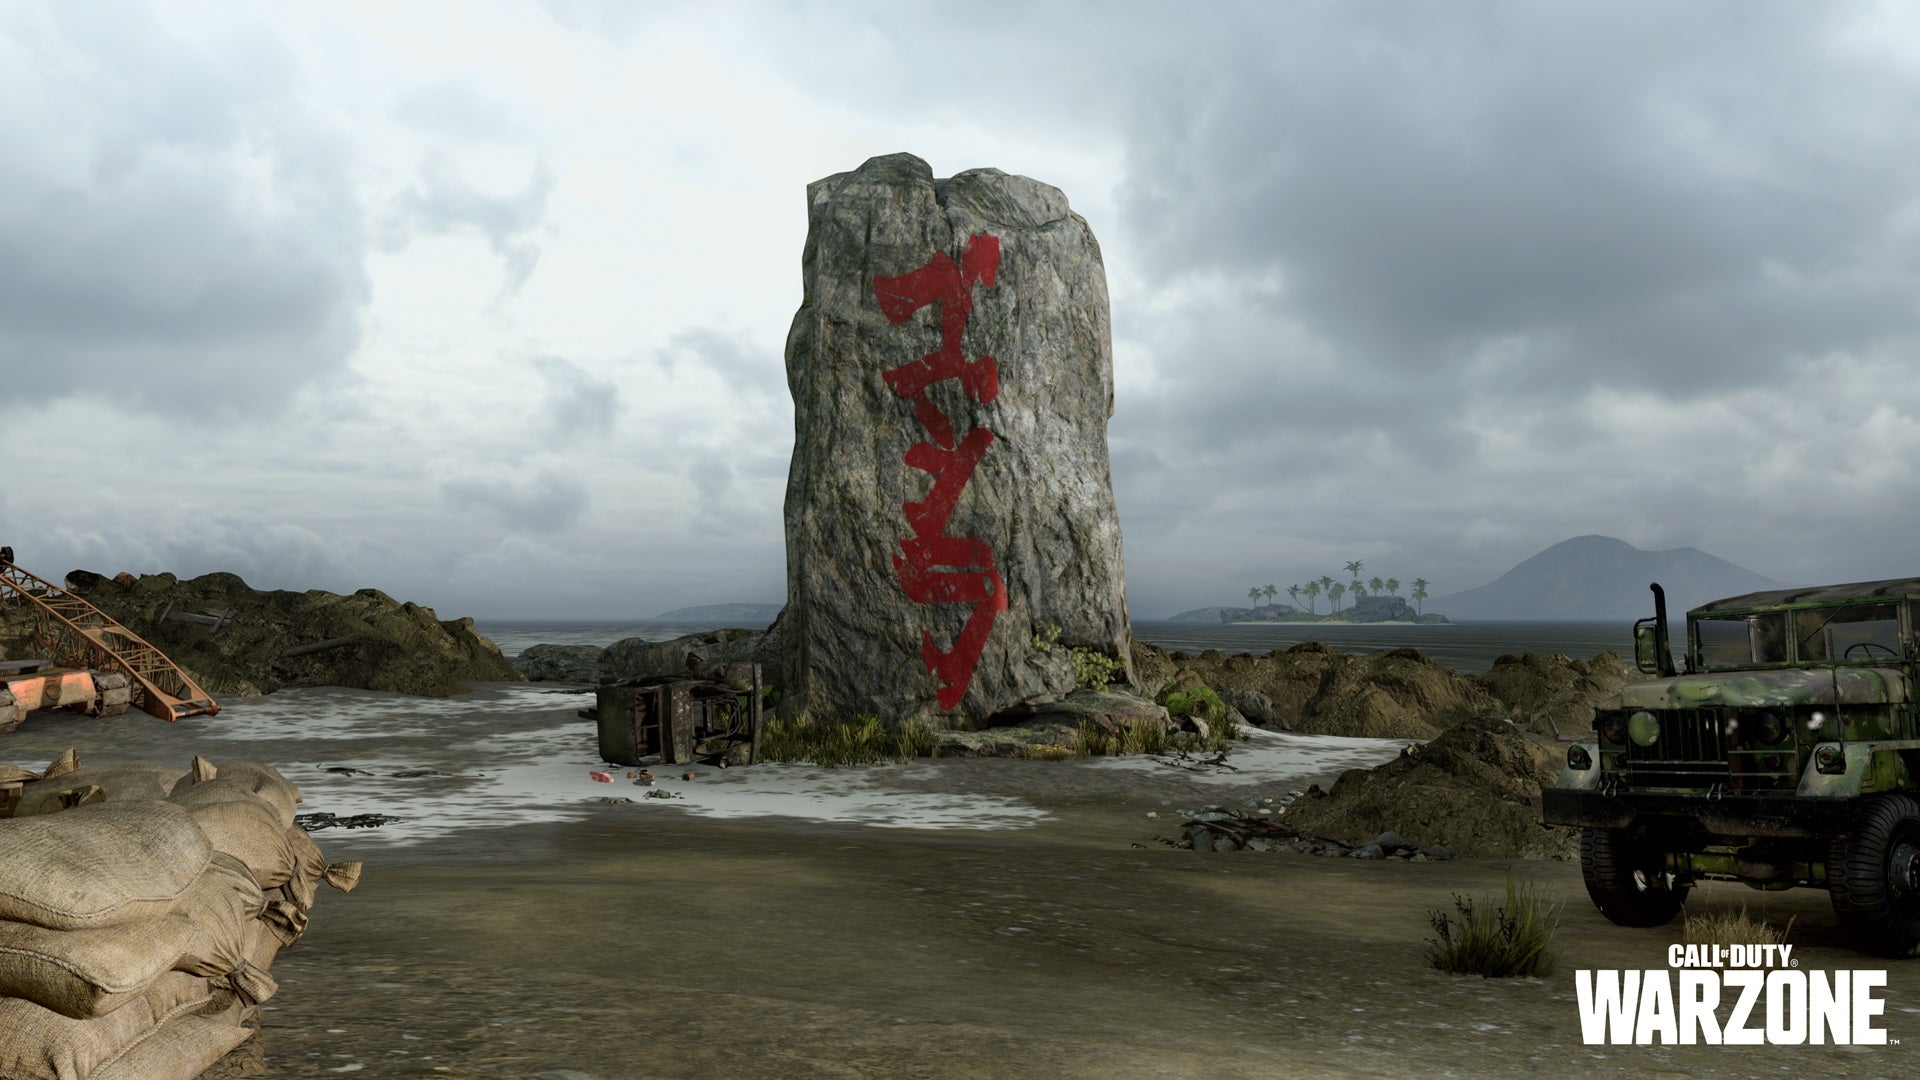 A strange monolith on the beaches by the lagoon. Located in Warzone Pacific.